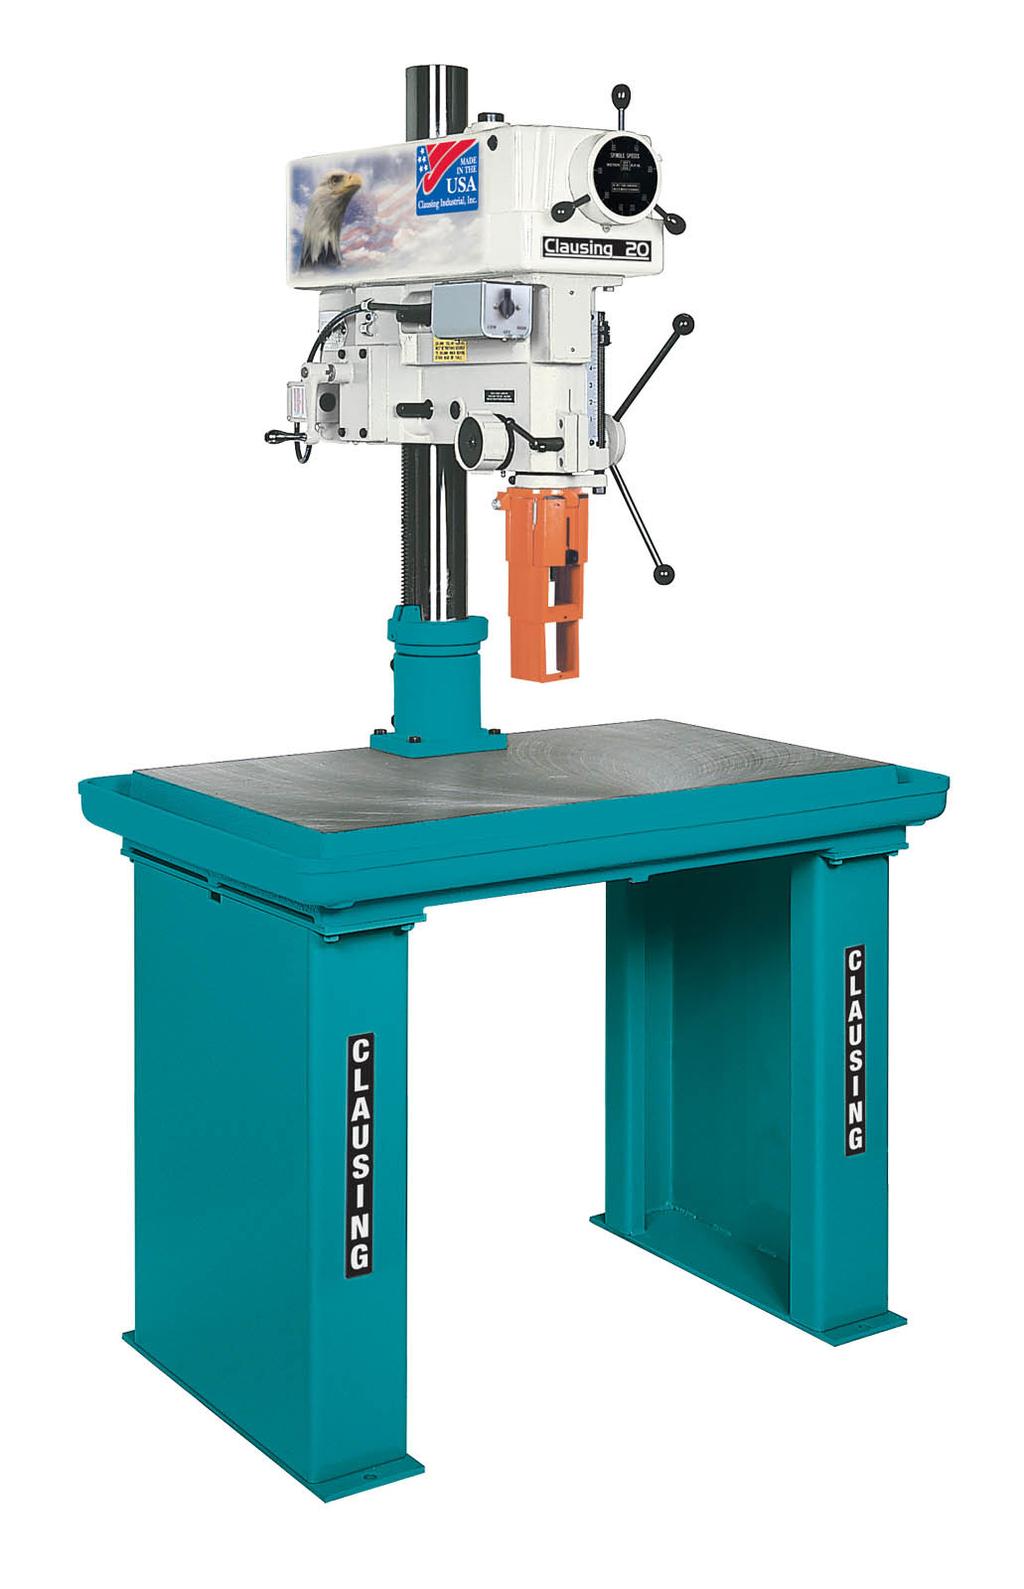 MULTIPLE 20 MULTIPLE SPINDLE SPINDLE DRILL DRILL PRESSES PRESSES 20 (508MM) MULTIPLE SPINDLE DRILL PRESSES Clausing multiple spindle drills can be custom built with up to four 20 heads.